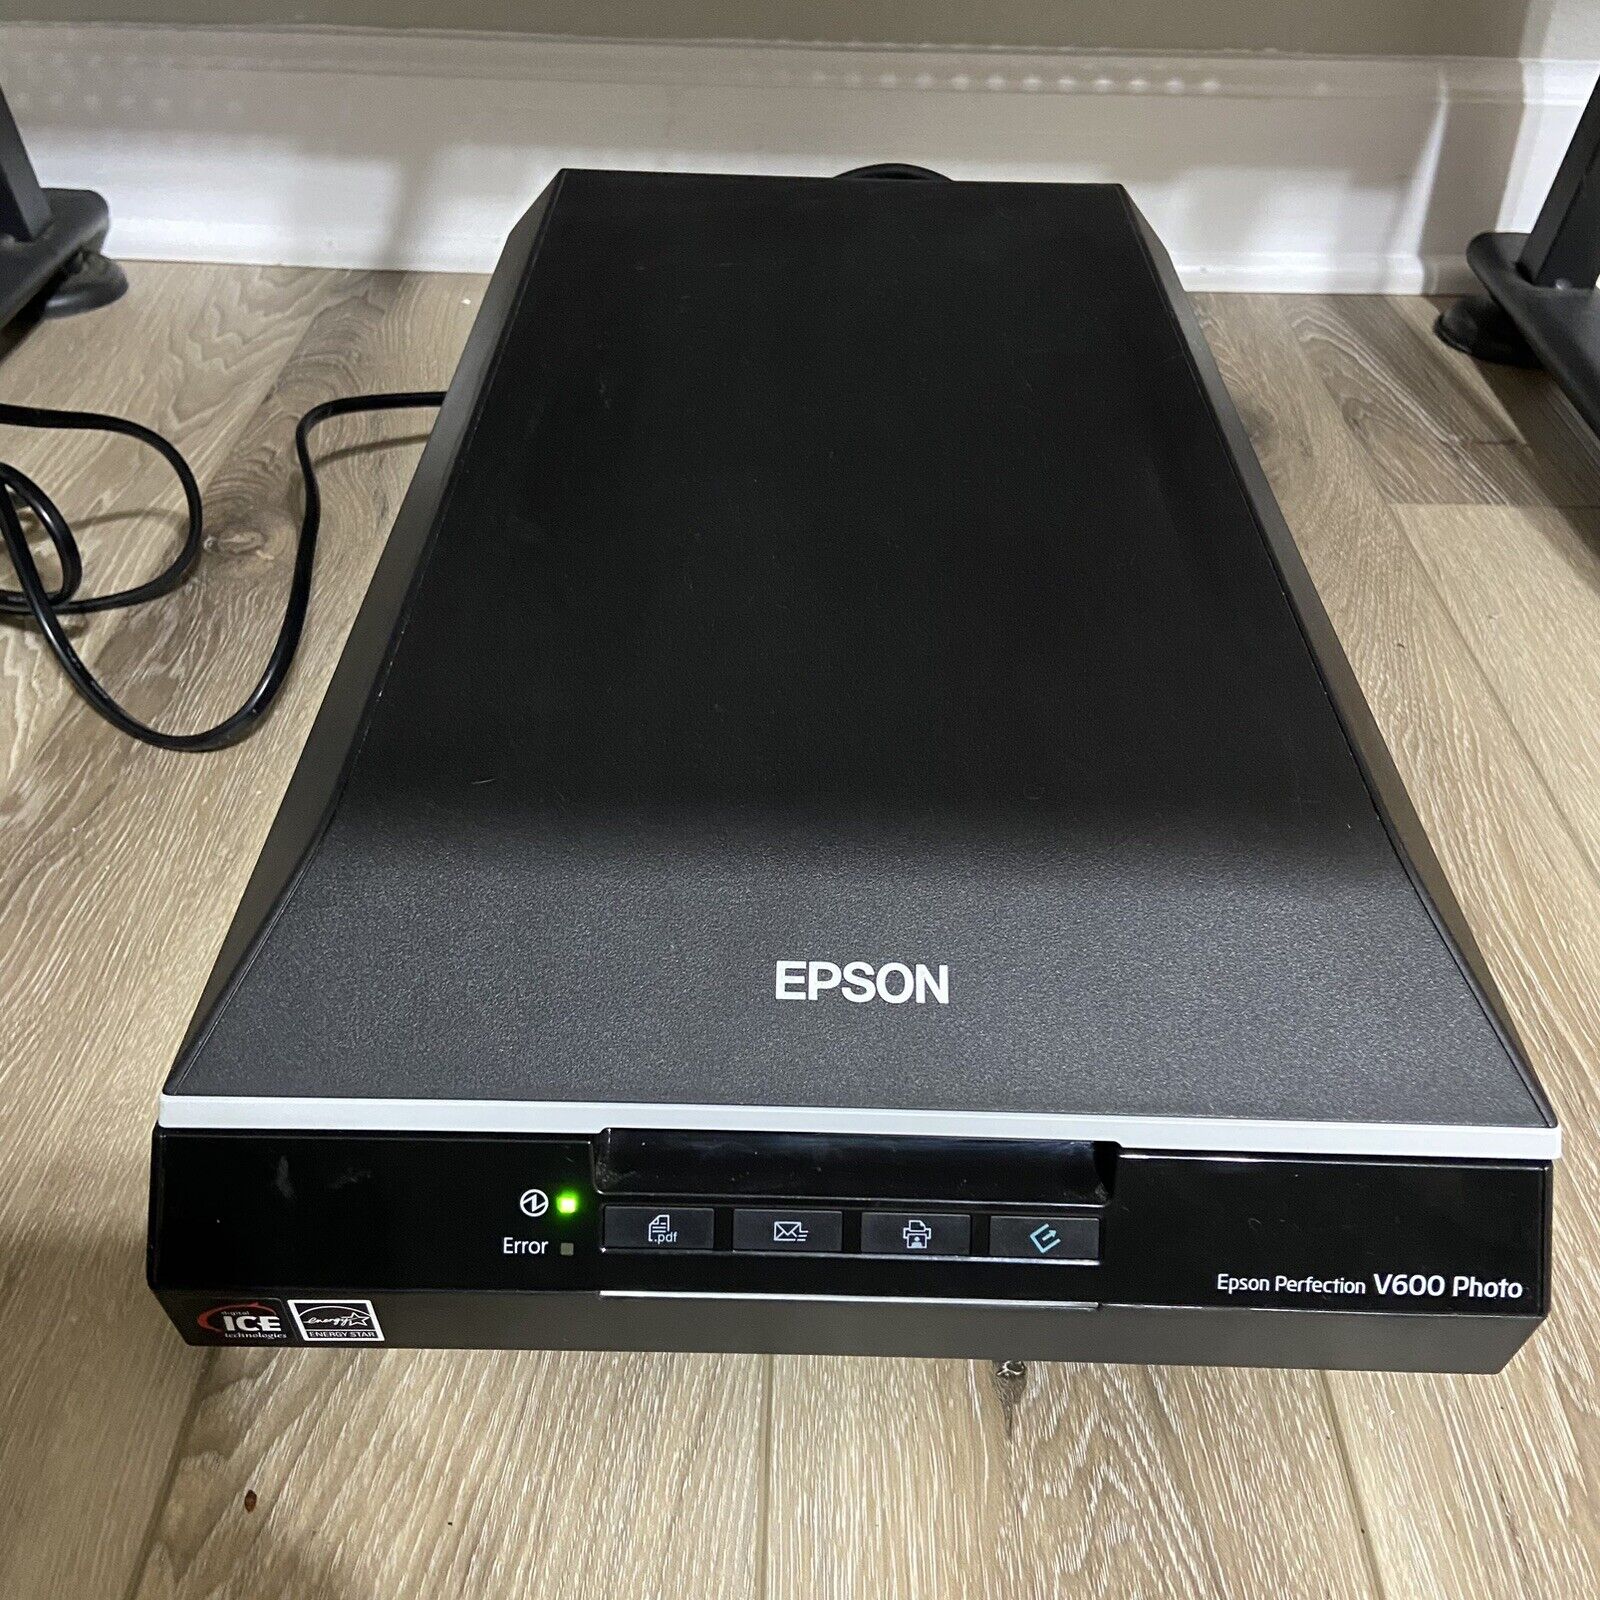 Epson Perfection V600 Photo Scanner Model J252A Tested Comes with Power Cord